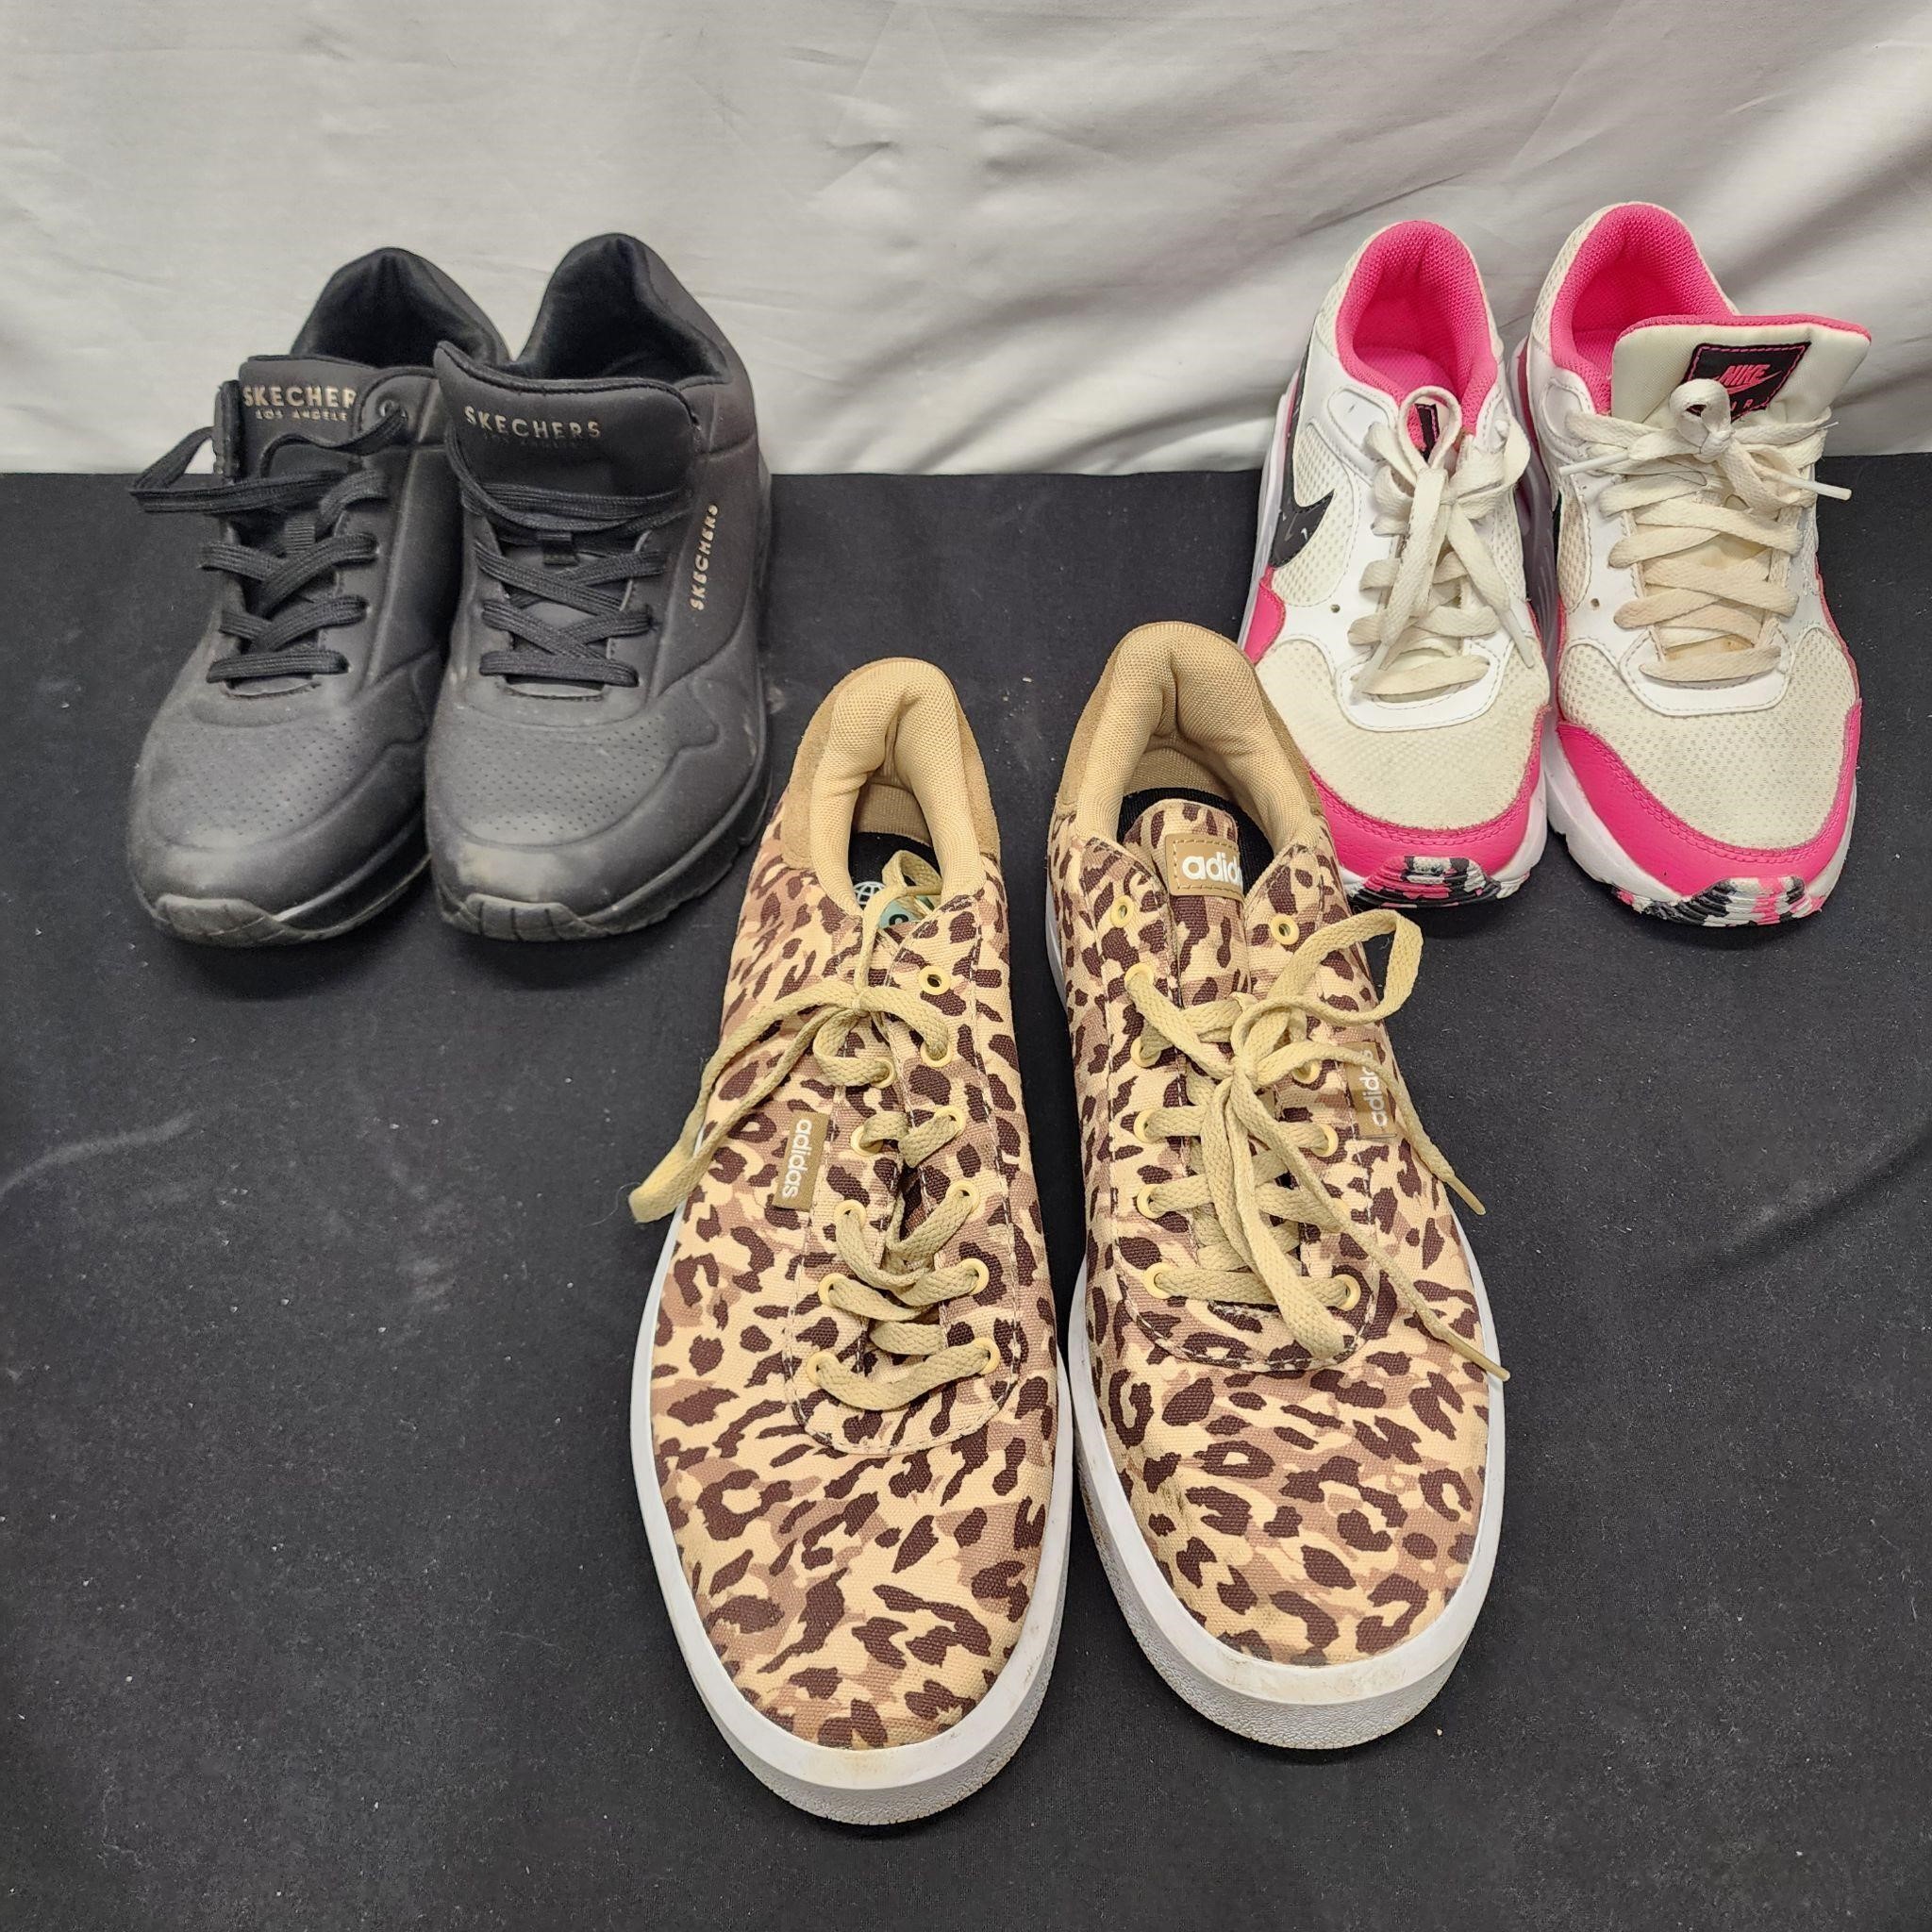 3 Pairs of Women's Shoes; 7, 8, 8.5